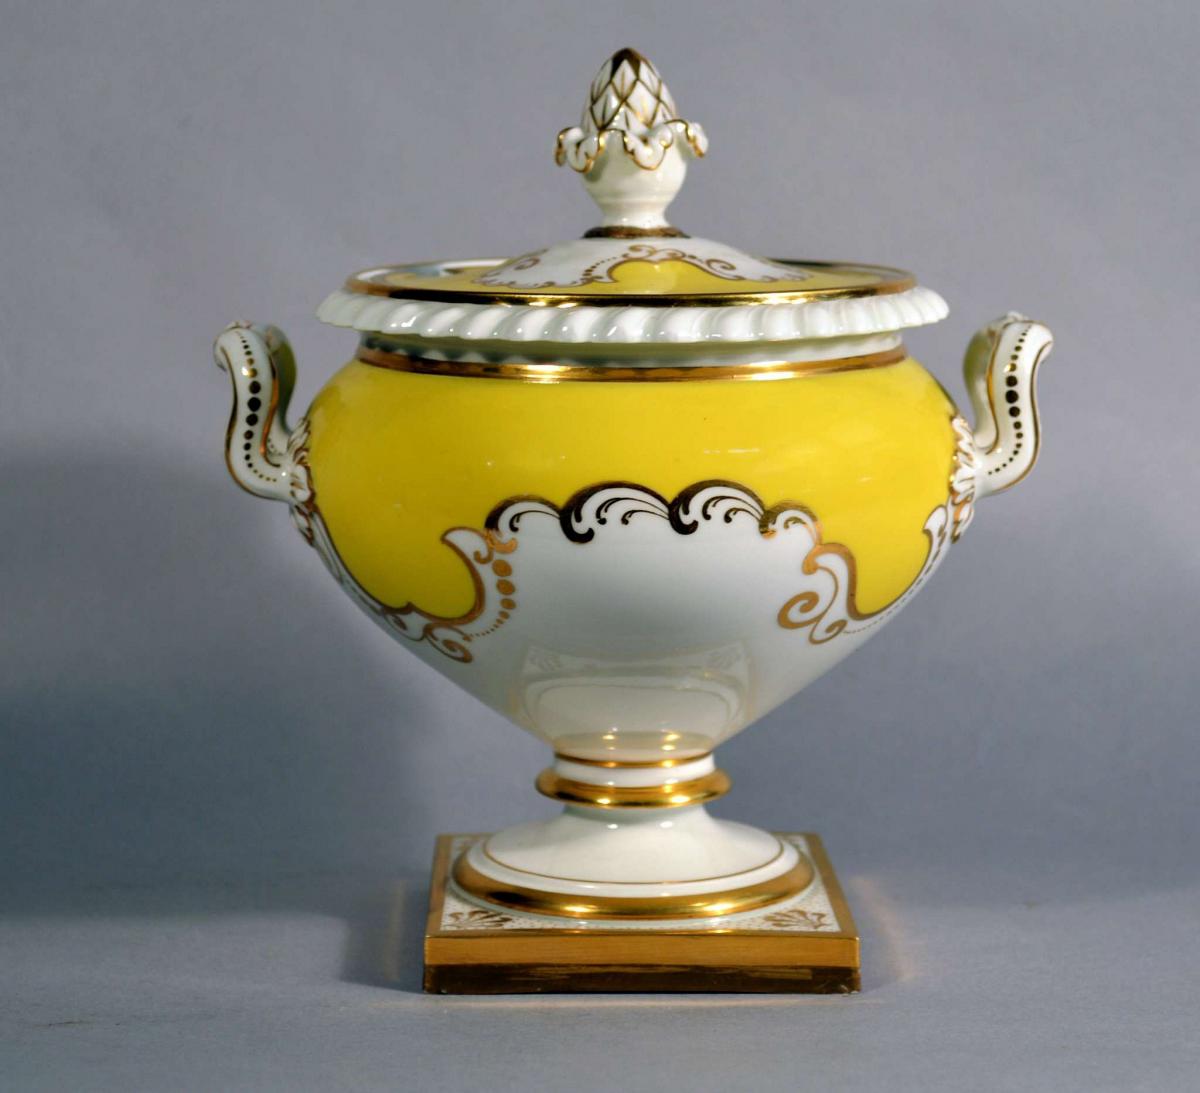 Flight, Barr & Barr Worcester Porcelain Yellow Sauce Tureen and Cover, Circa 1825